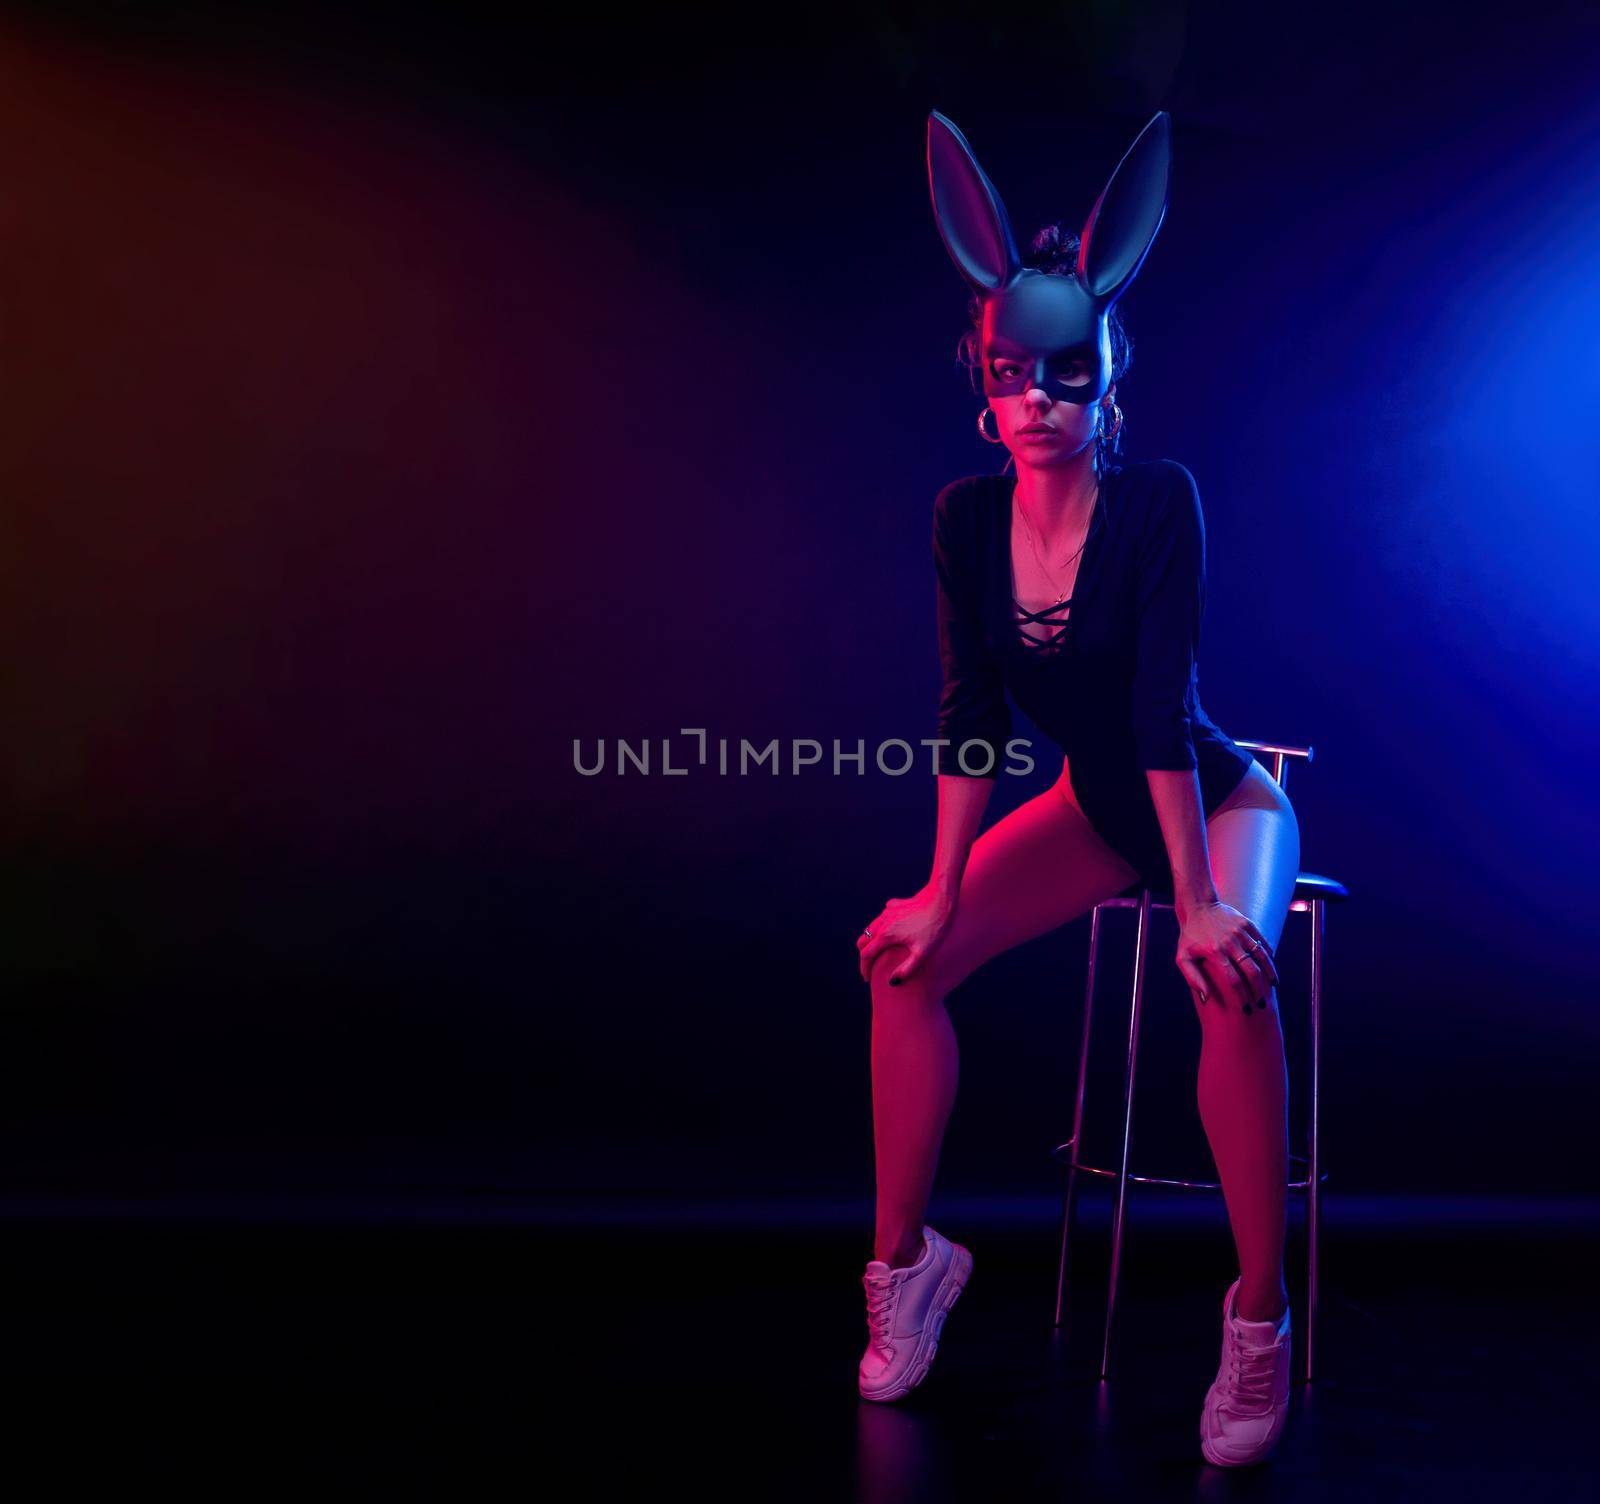 a beautiful girl in a bodysuit poses in a photo Studio on a dark background in neon light. On the face of a rabbit mask by Rotozey